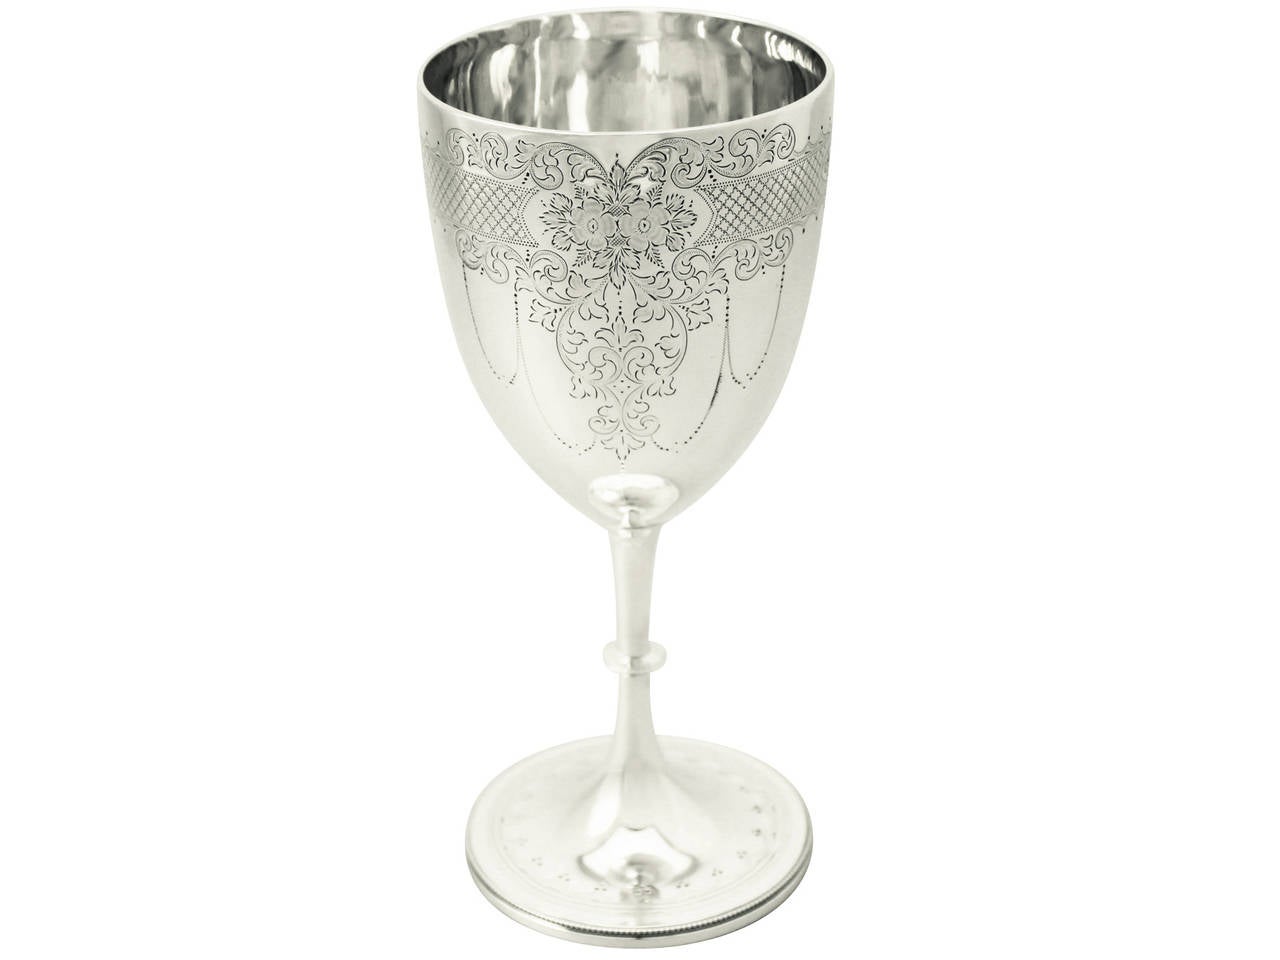 English Sterling Silver Presentation Cup - Antique Edwardian